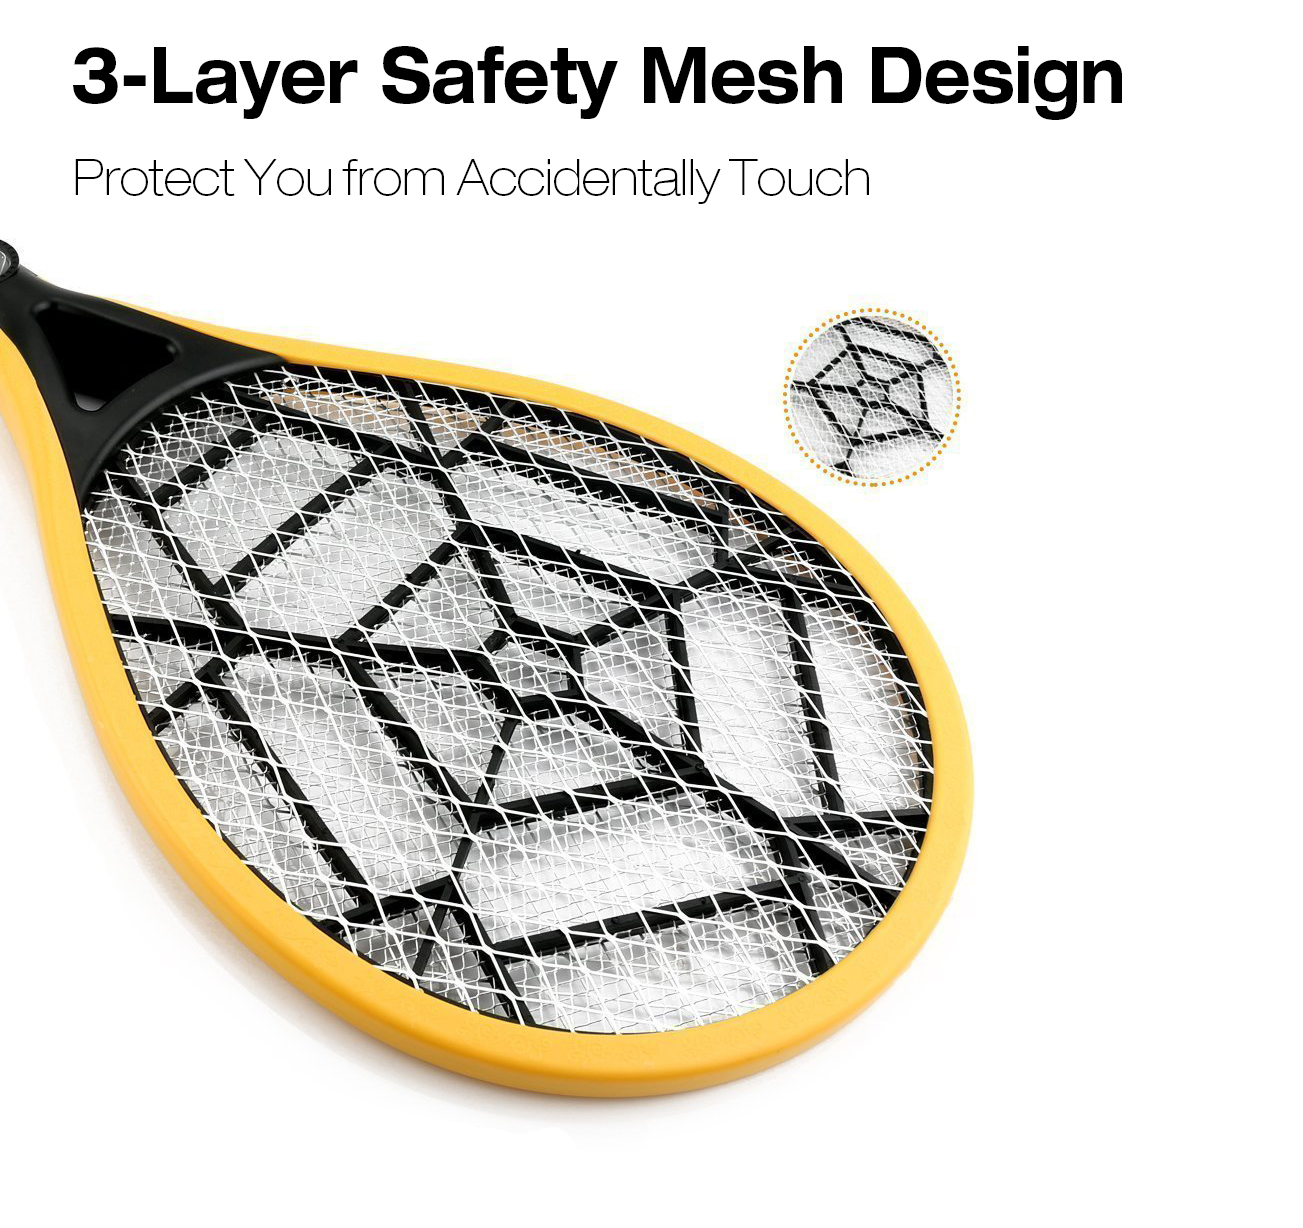 Loskii-HA-32-Rechargeable-Electronic-Mosquito-Pest-Killer-3-Layer-Mesh-Fly-Swatter-with-LED-Light-1256737